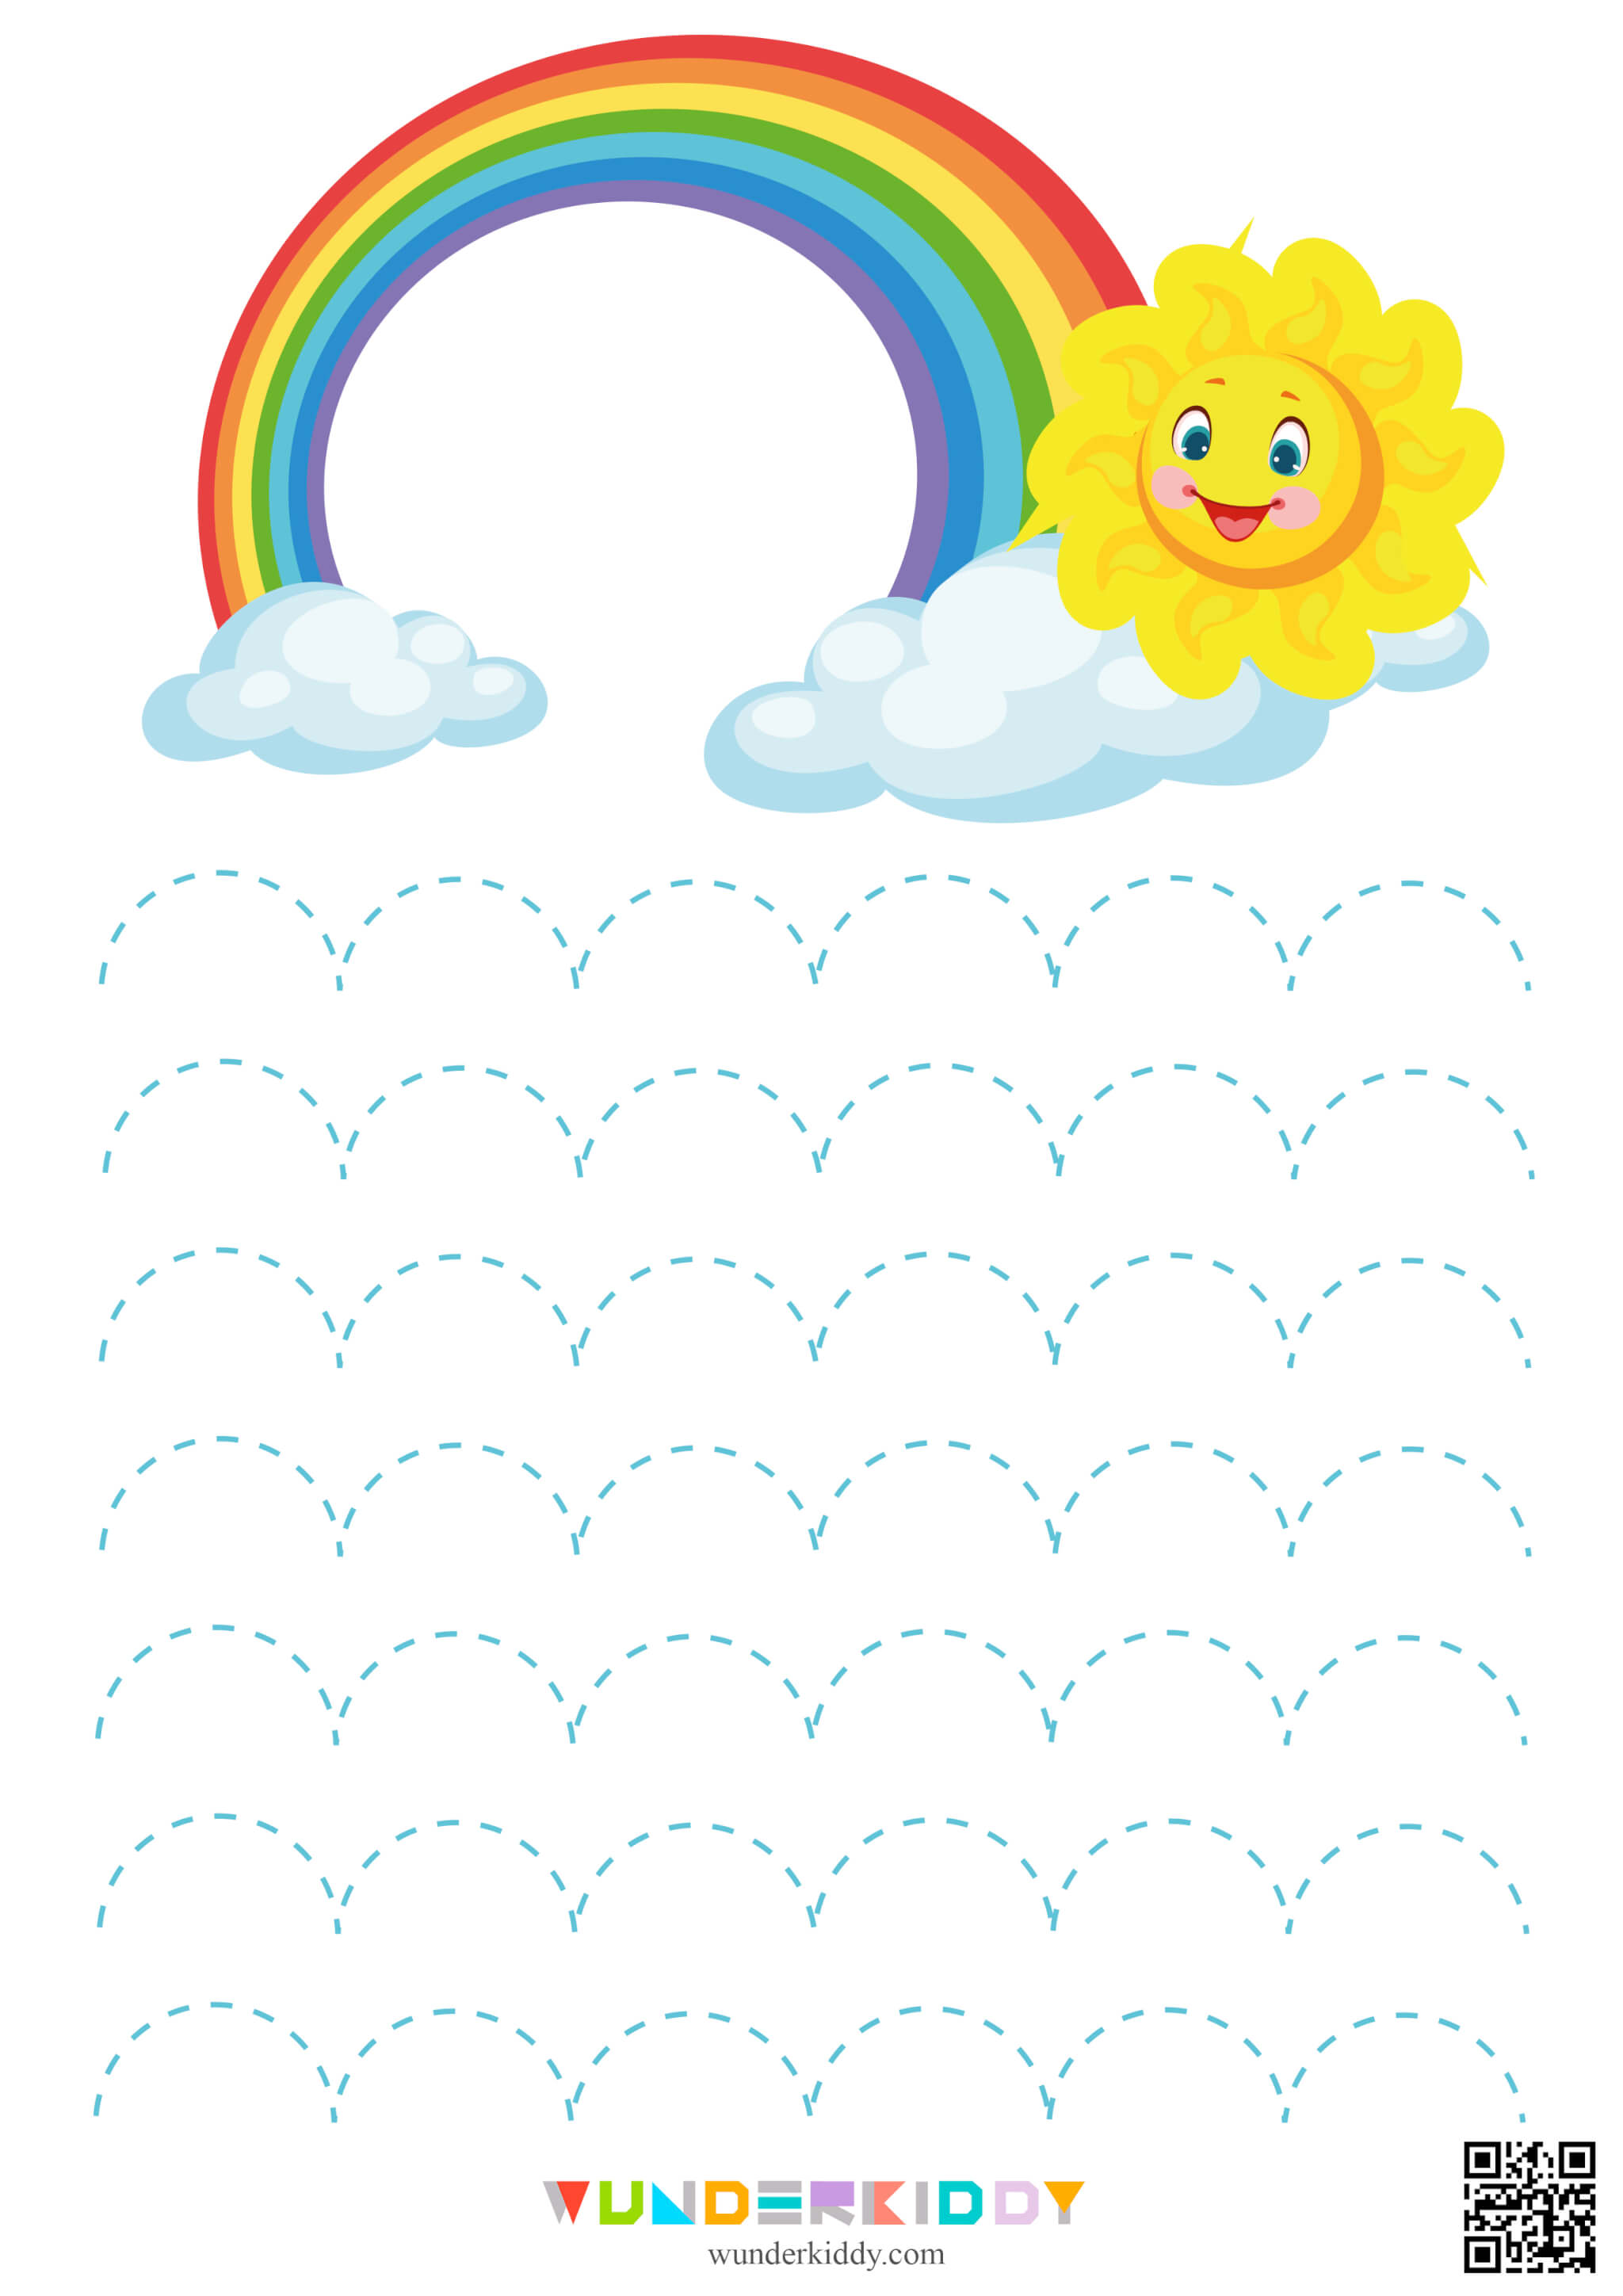 Worksheet for Pre-writing Practice Sun and Rainbow - Image 5